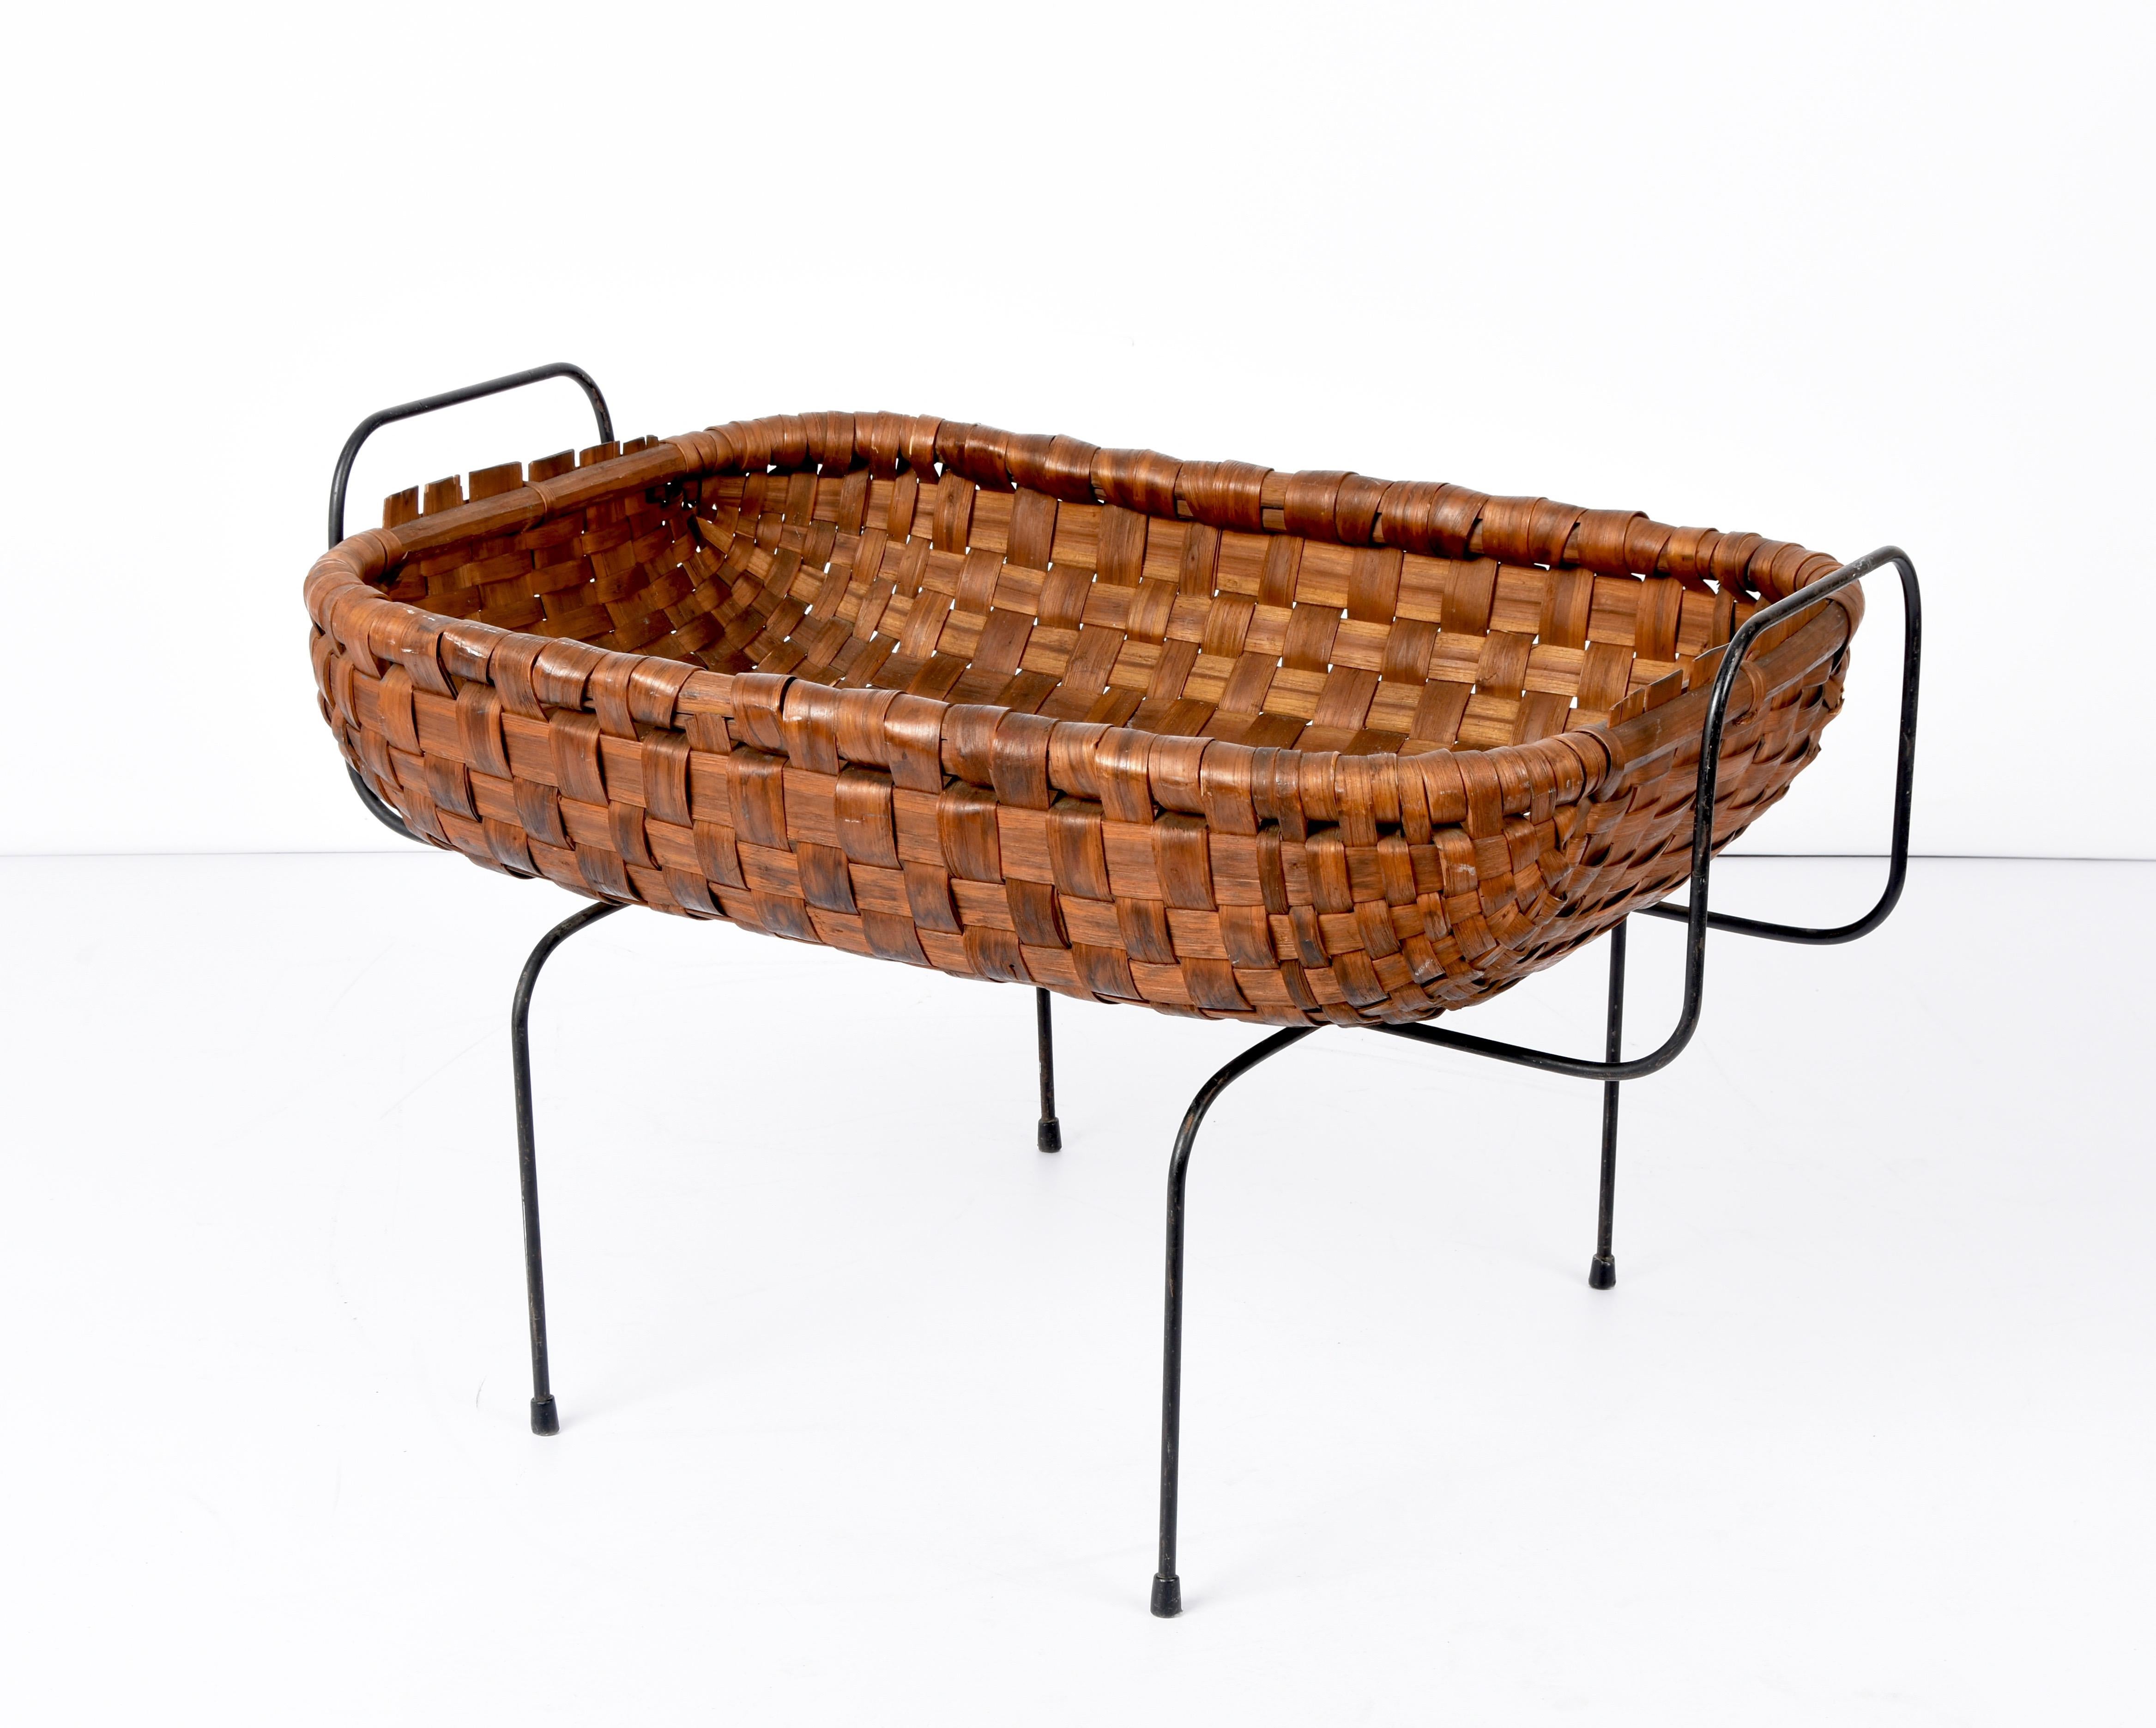 Unique mid-century chestnut wood, black metal and brass magazine basket. This amazing piece was made in Italy during the 1960s.

This piece is stunning as it has a black metal base, a fantastic interweaved chestnut wood basket and elegant brass